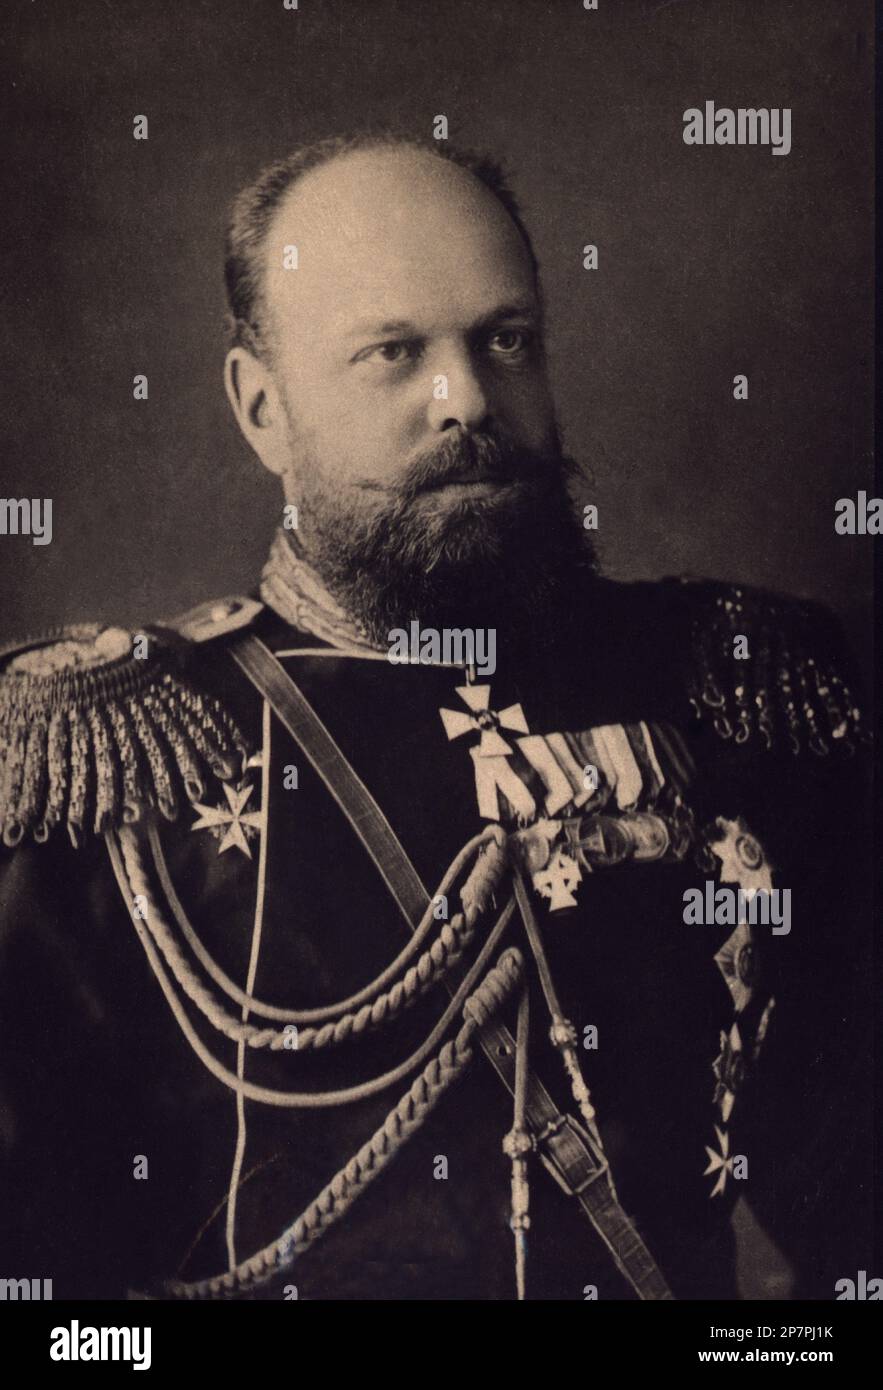 1885 ca , Paris , France : The russian Tsar  ALEXANDER III ( 1845 –  1894 ) reigned as Emperor of Russia from  1881 until his death in 1894 . Second son of Tsar Alexander II by his wife Marie of Hesse-Darmstadt . Alexander III had six children from his marriage with Princess Dagmar of Denmark, also known as Marie Feodorovna .  Father of last Emperor of Russia , the Tsar Nicholas II ( 1868 - 1918 ), married 1894 with Princess Alix of Hesse and by Rhine . Photo by Atelier Nadar , Paris  .- foto storiche - foto storica  - beard - barba - portrait - ritratto - nobiltà  - nobility - nobili  - nobil Stock Photo